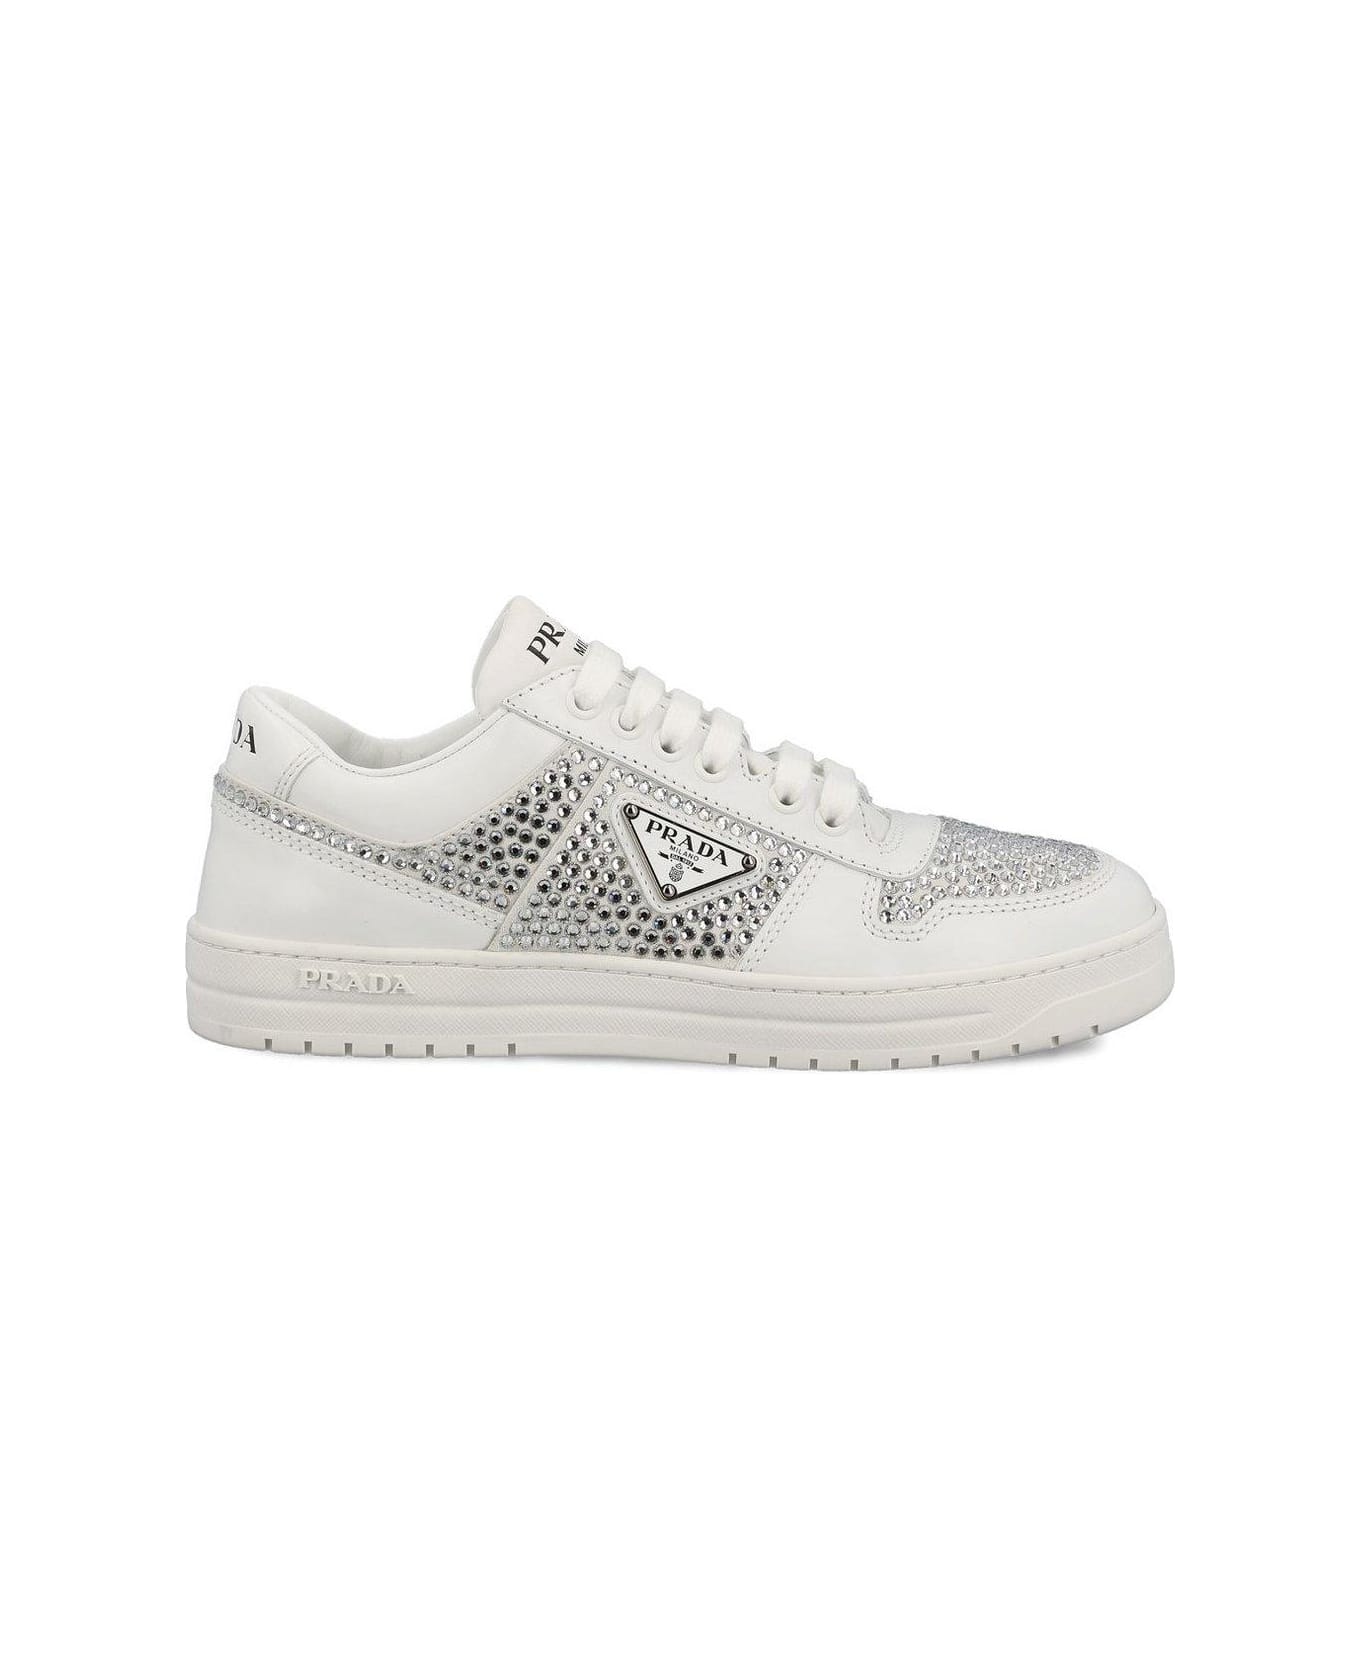 Prada Embellished Lace-up Sneakers - WHITE